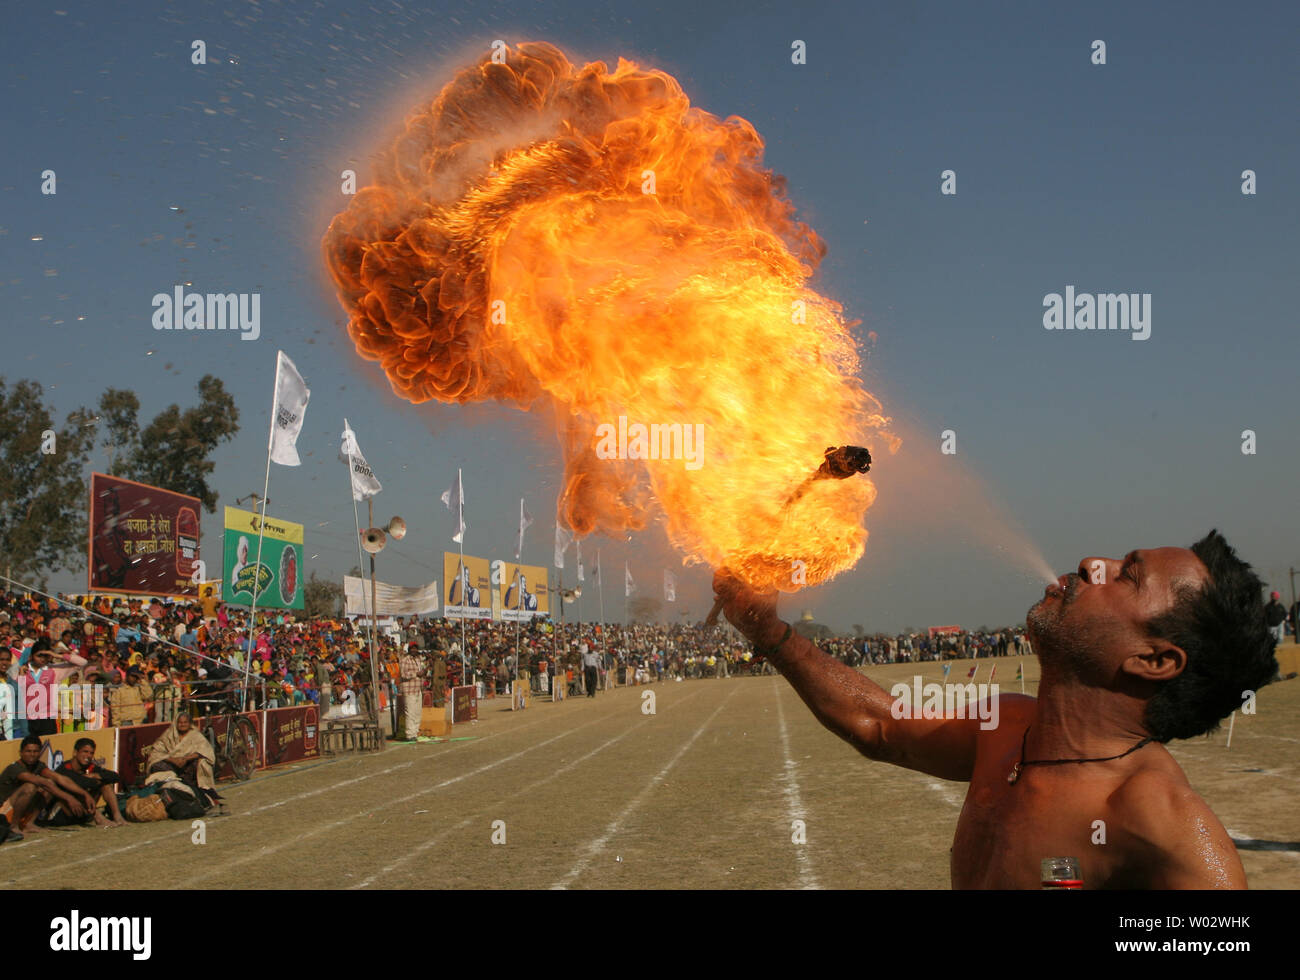 An Indian villager spews fire during the Kila Raipur Sports Festival, also known as the Rural Olympics near Ludhiana, February 9, 2008. The games started in 1933 and takes place over a three-day period during which competitors enter various rural sports events including equestrian events, bullock cart races and shows of strength.  (UPI Photo) Stock Photo